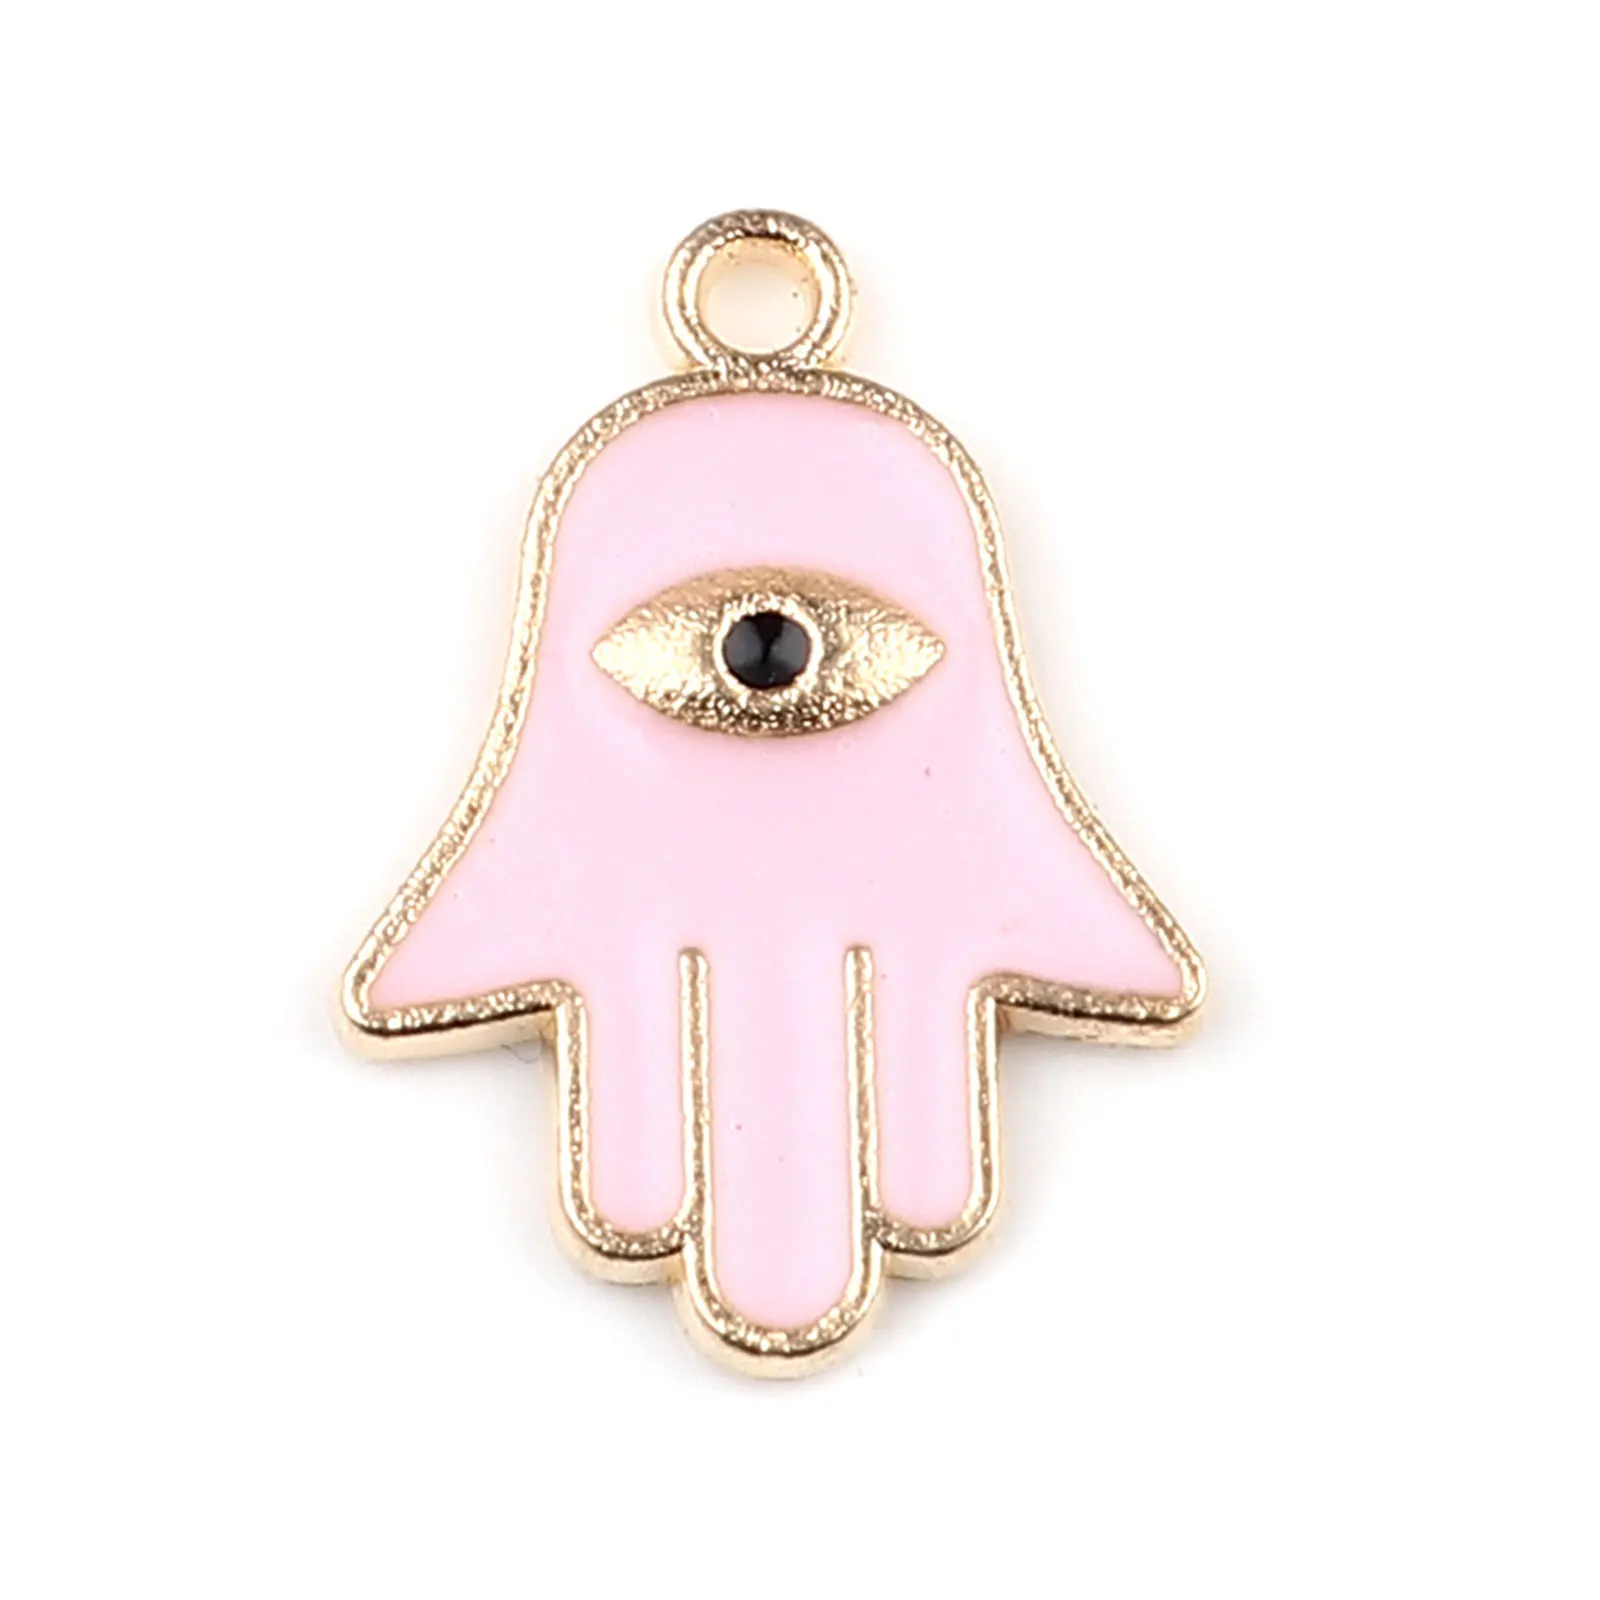 

DoreenBeads Religious Charms Symbol Hand Gold Color Eye Pink/White Enamel Pendants DIY Making Jewelry Gifts 21mm x 15mm, 10 PCs